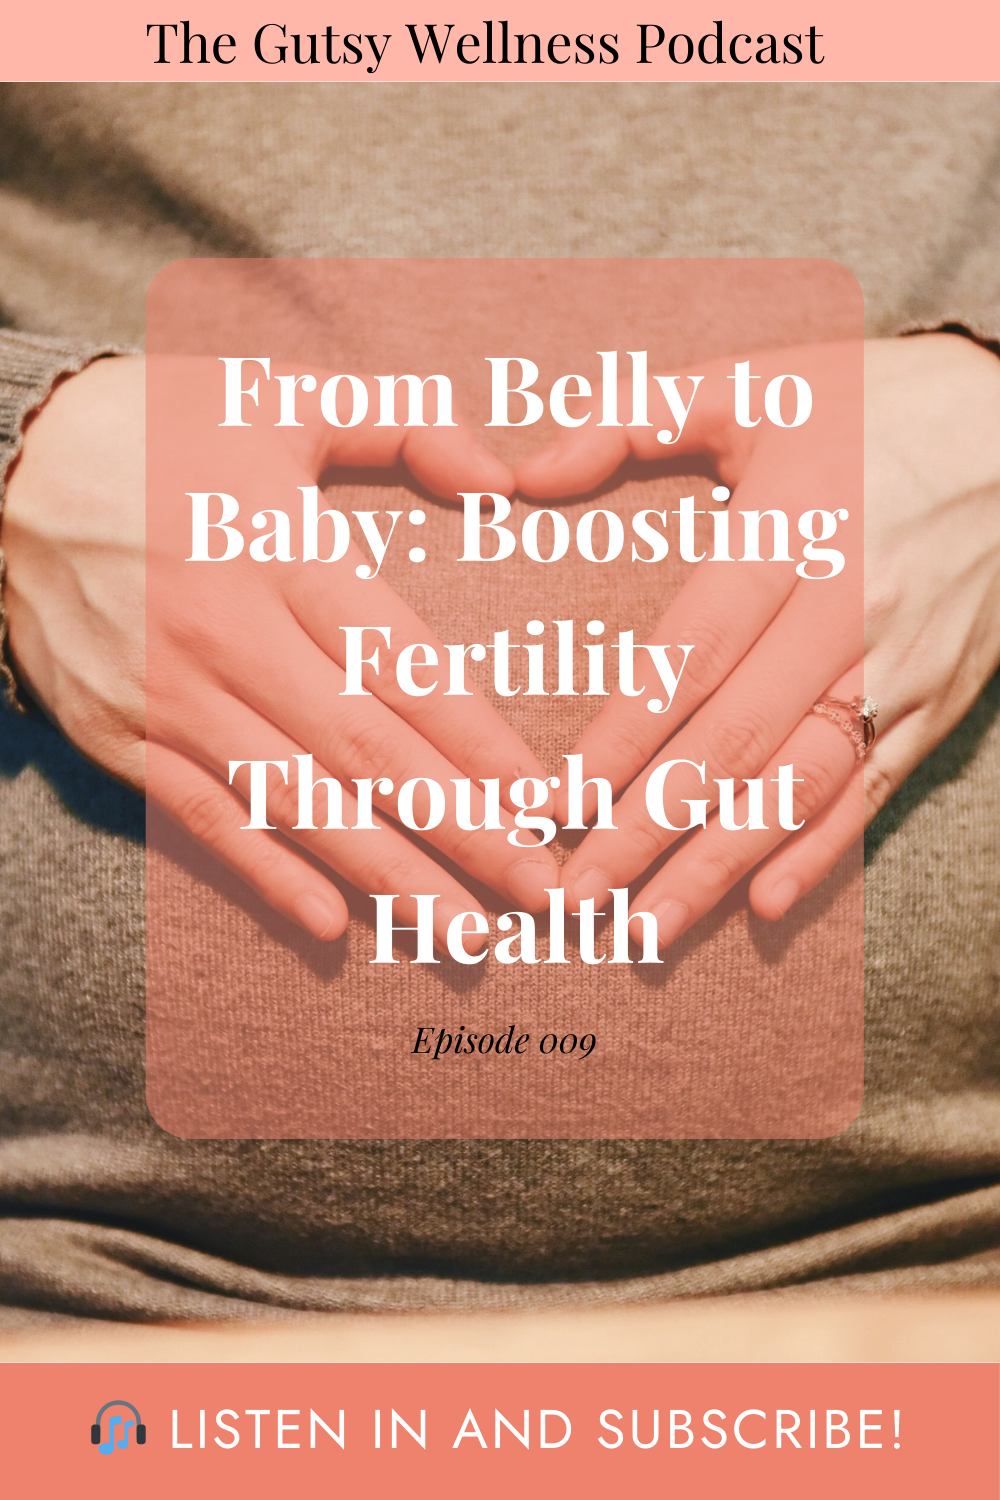 From Belly to Baby: Boosting Fertility Through Gut Health